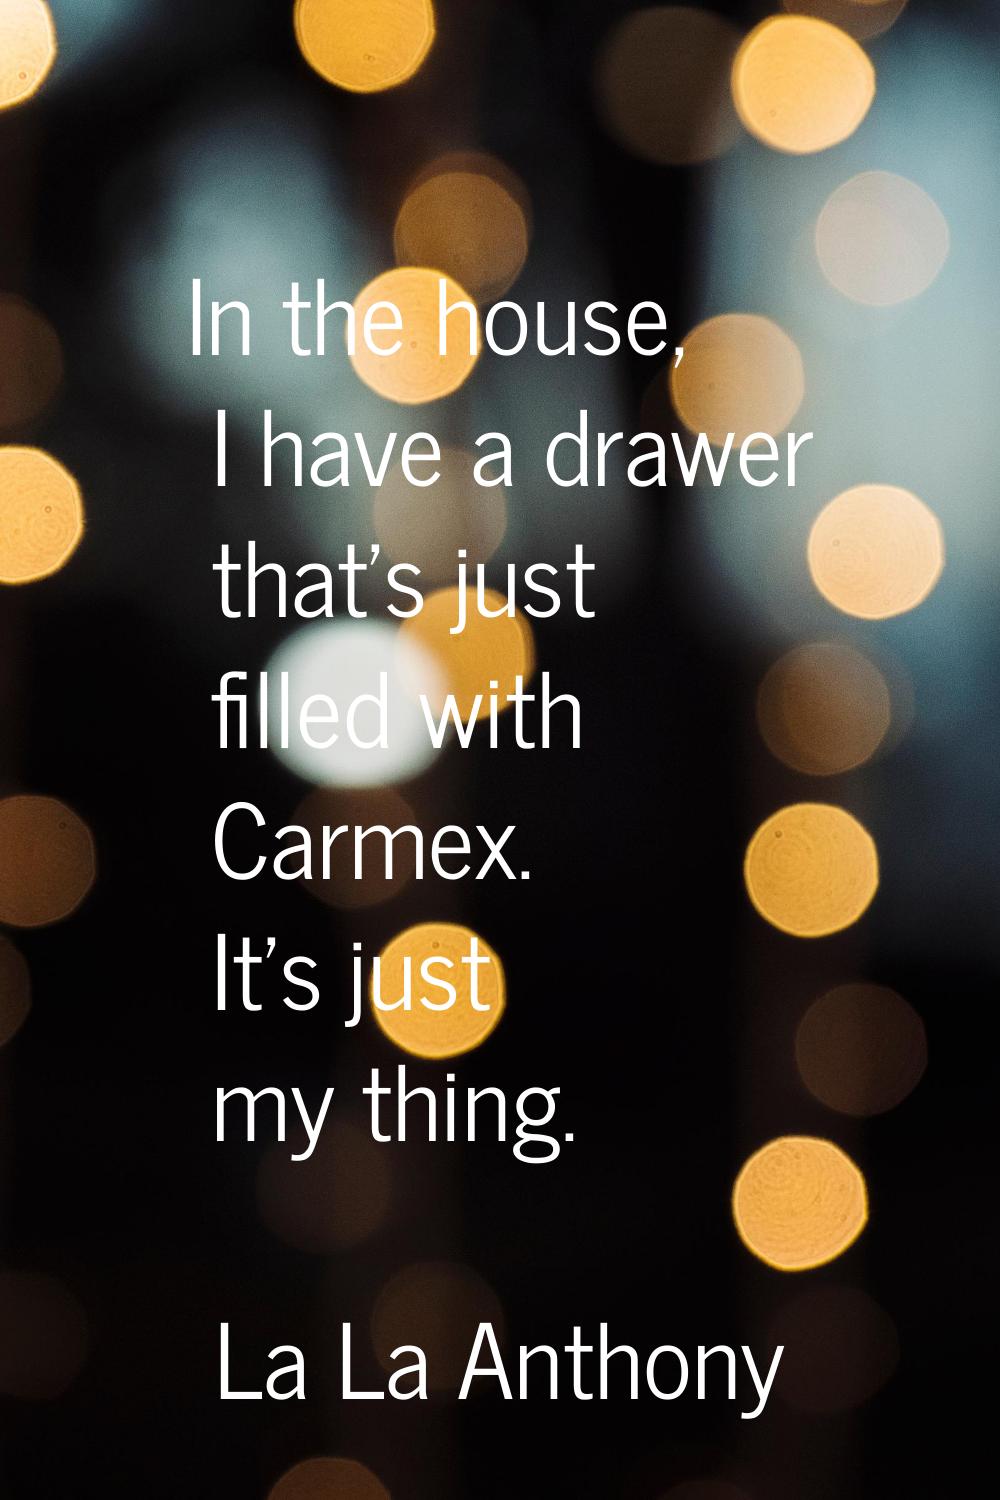 In the house, I have a drawer that's just filled with Carmex. It's just my thing.